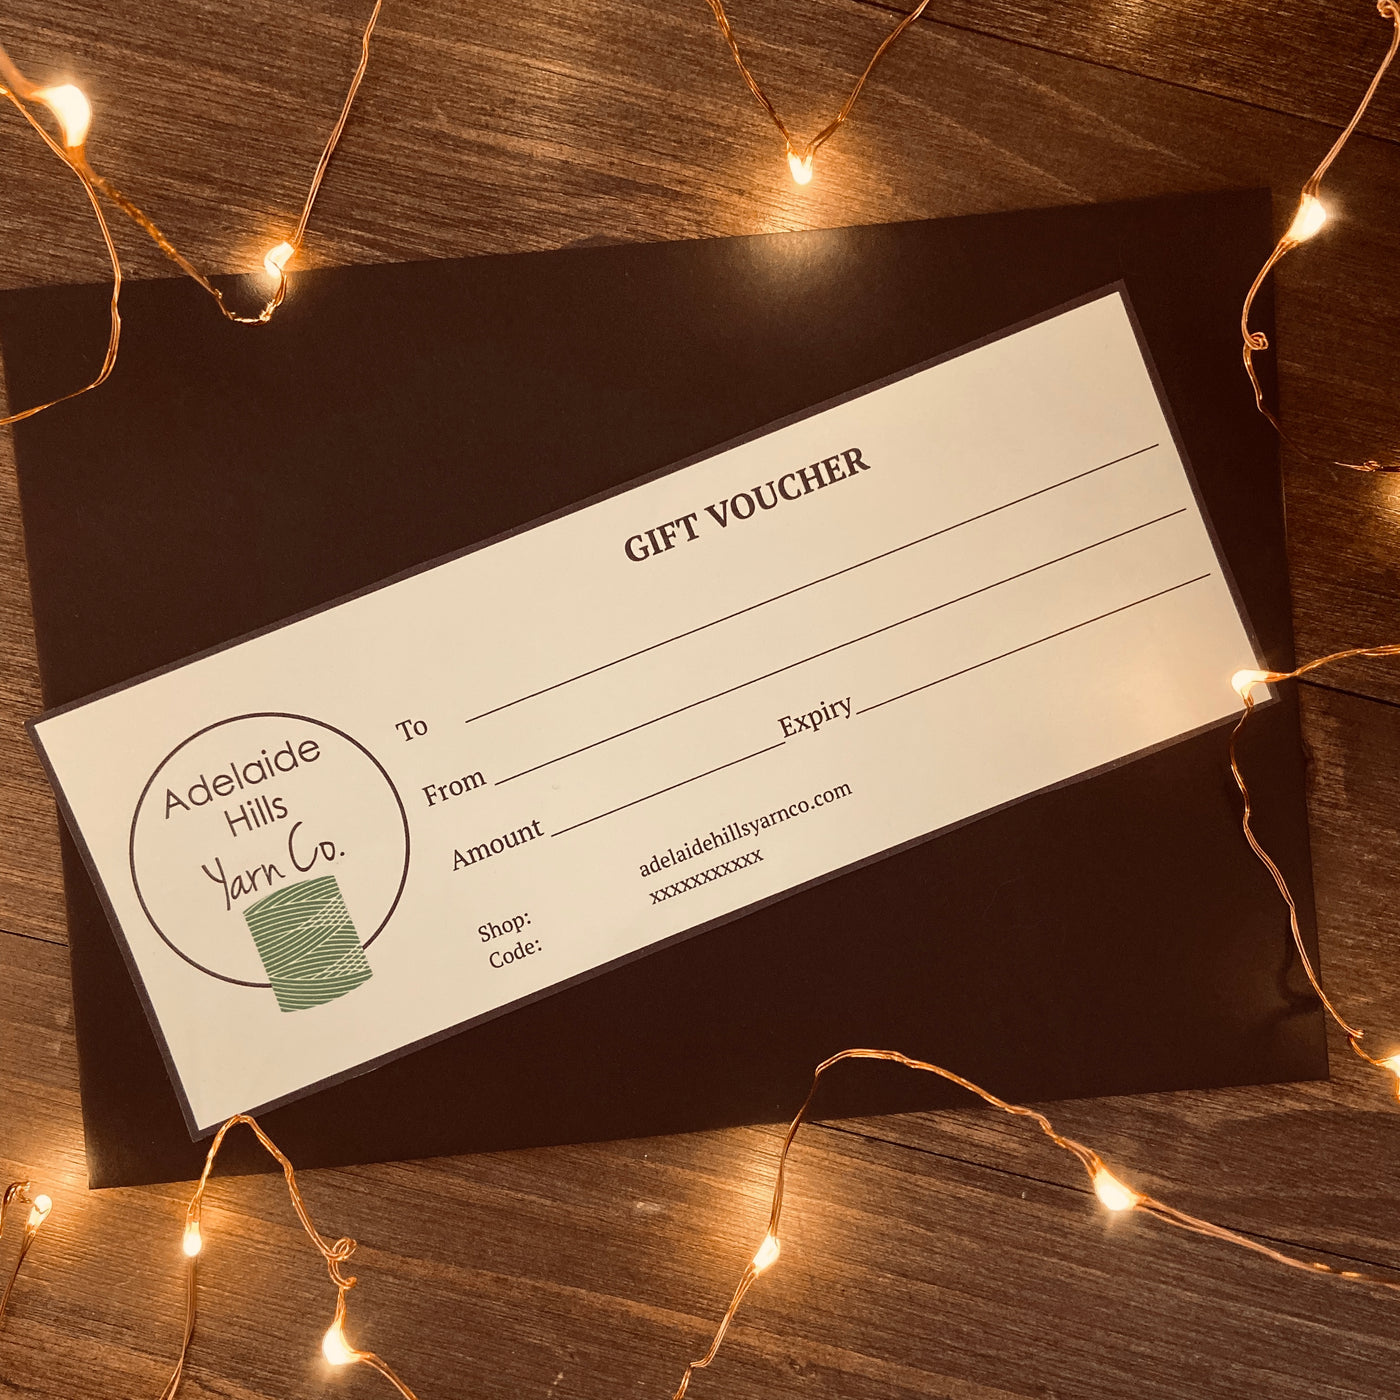 The perfect gift for the crafty person you don't know what to buy!  Available in denominations of $10, $25, $50 and $100 and valid for 3 years from date of issue.  GIFT VOUCHERS WILL BE ISSUED DIGITALLY VIA EMAIL, BUT IF YOU PREFER SNAIL MAIL (SOME PEOPLE DO!) JUST LET US KNOW.   Please contact us if you have any questions, local pick-up is available, please contact us to arrange this at ahyarnco@gmail.com    